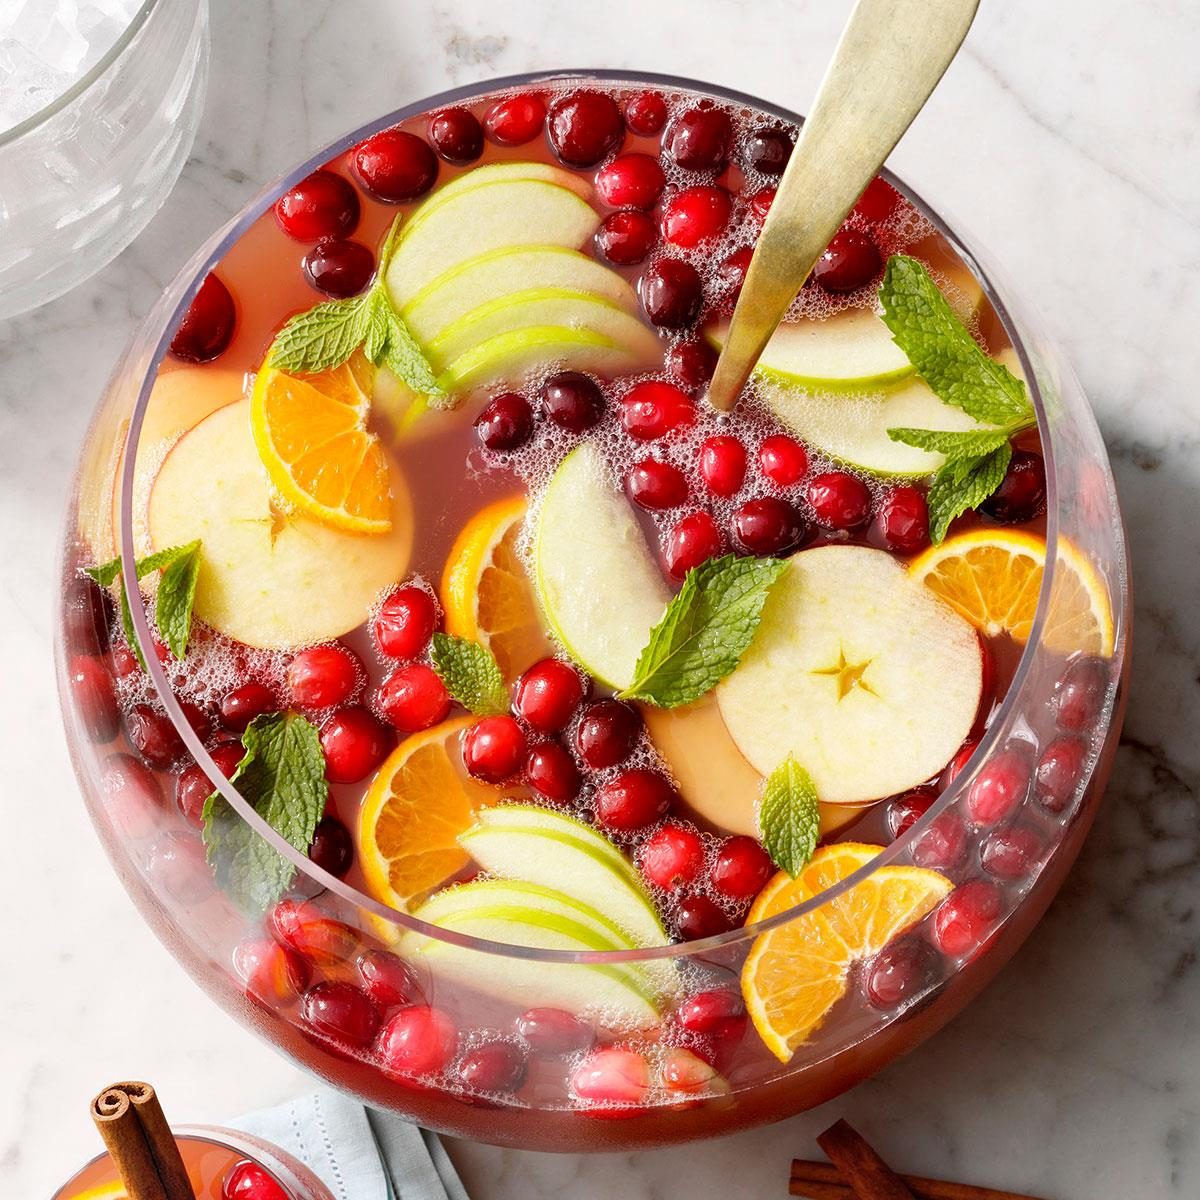 Chilled Christmas Punch